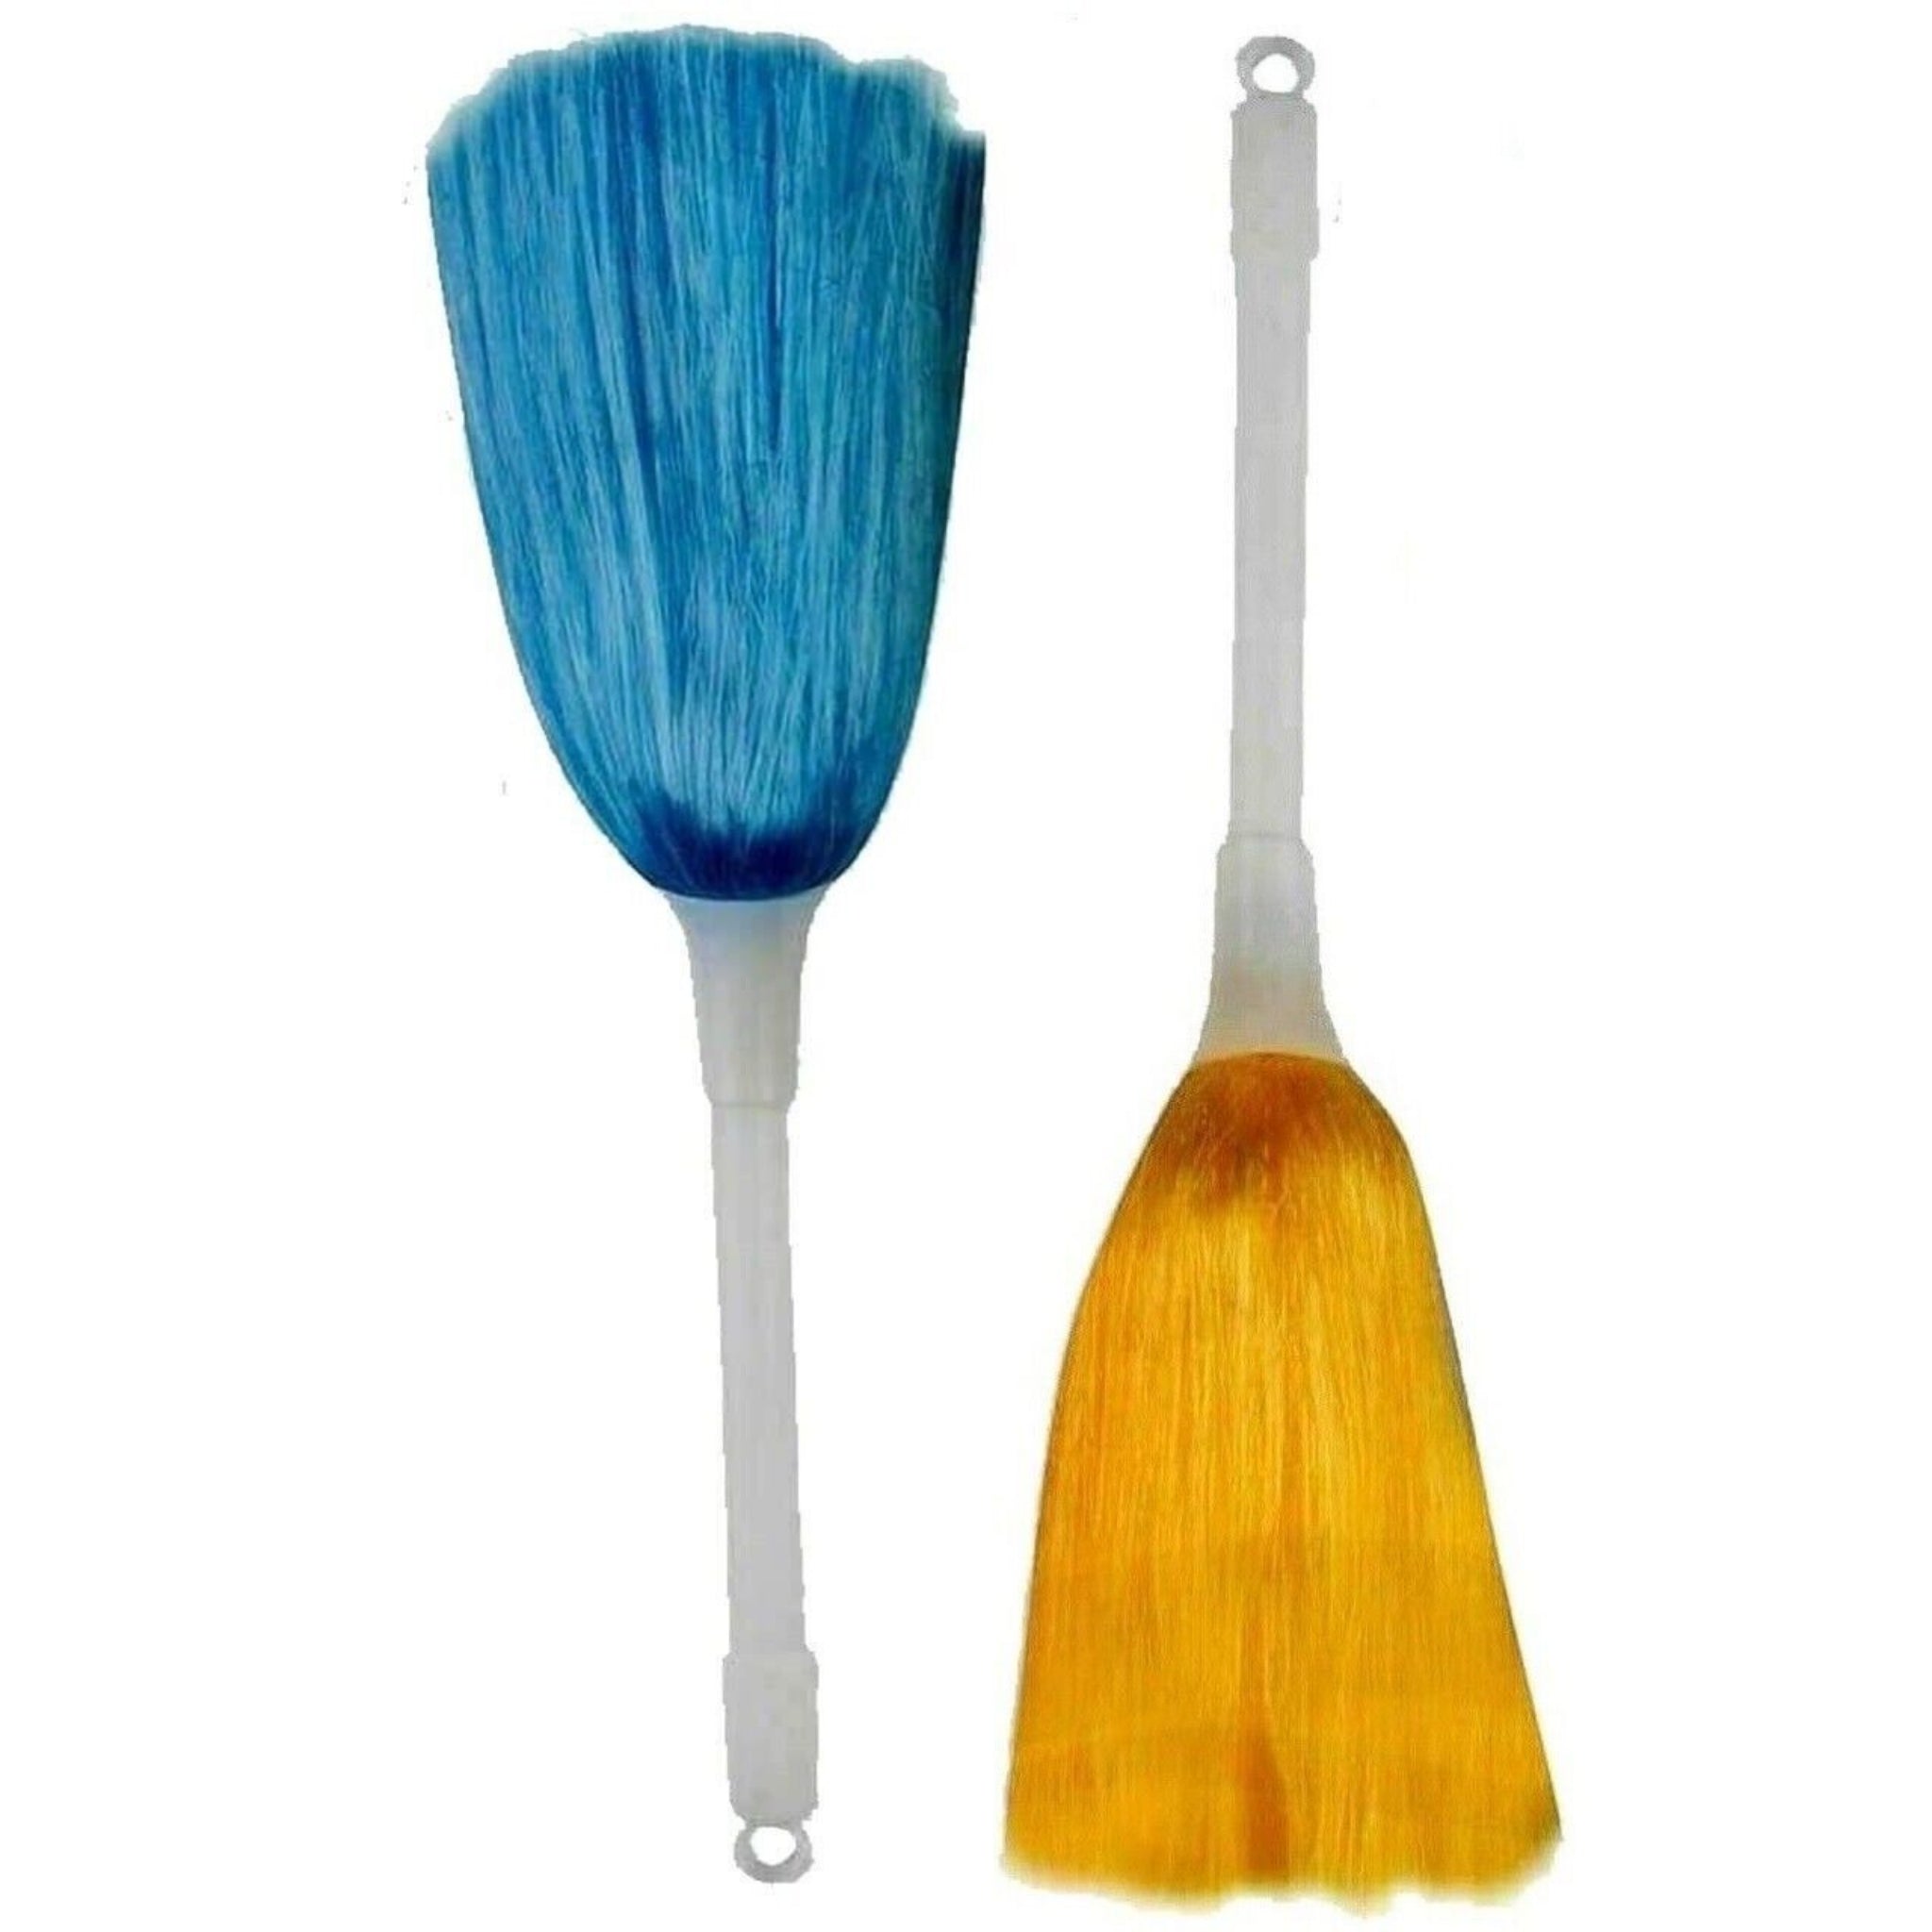 2x Mini Cleaning Duster Dust Magic Soft Cleaner Handle Feather Anti Static Small